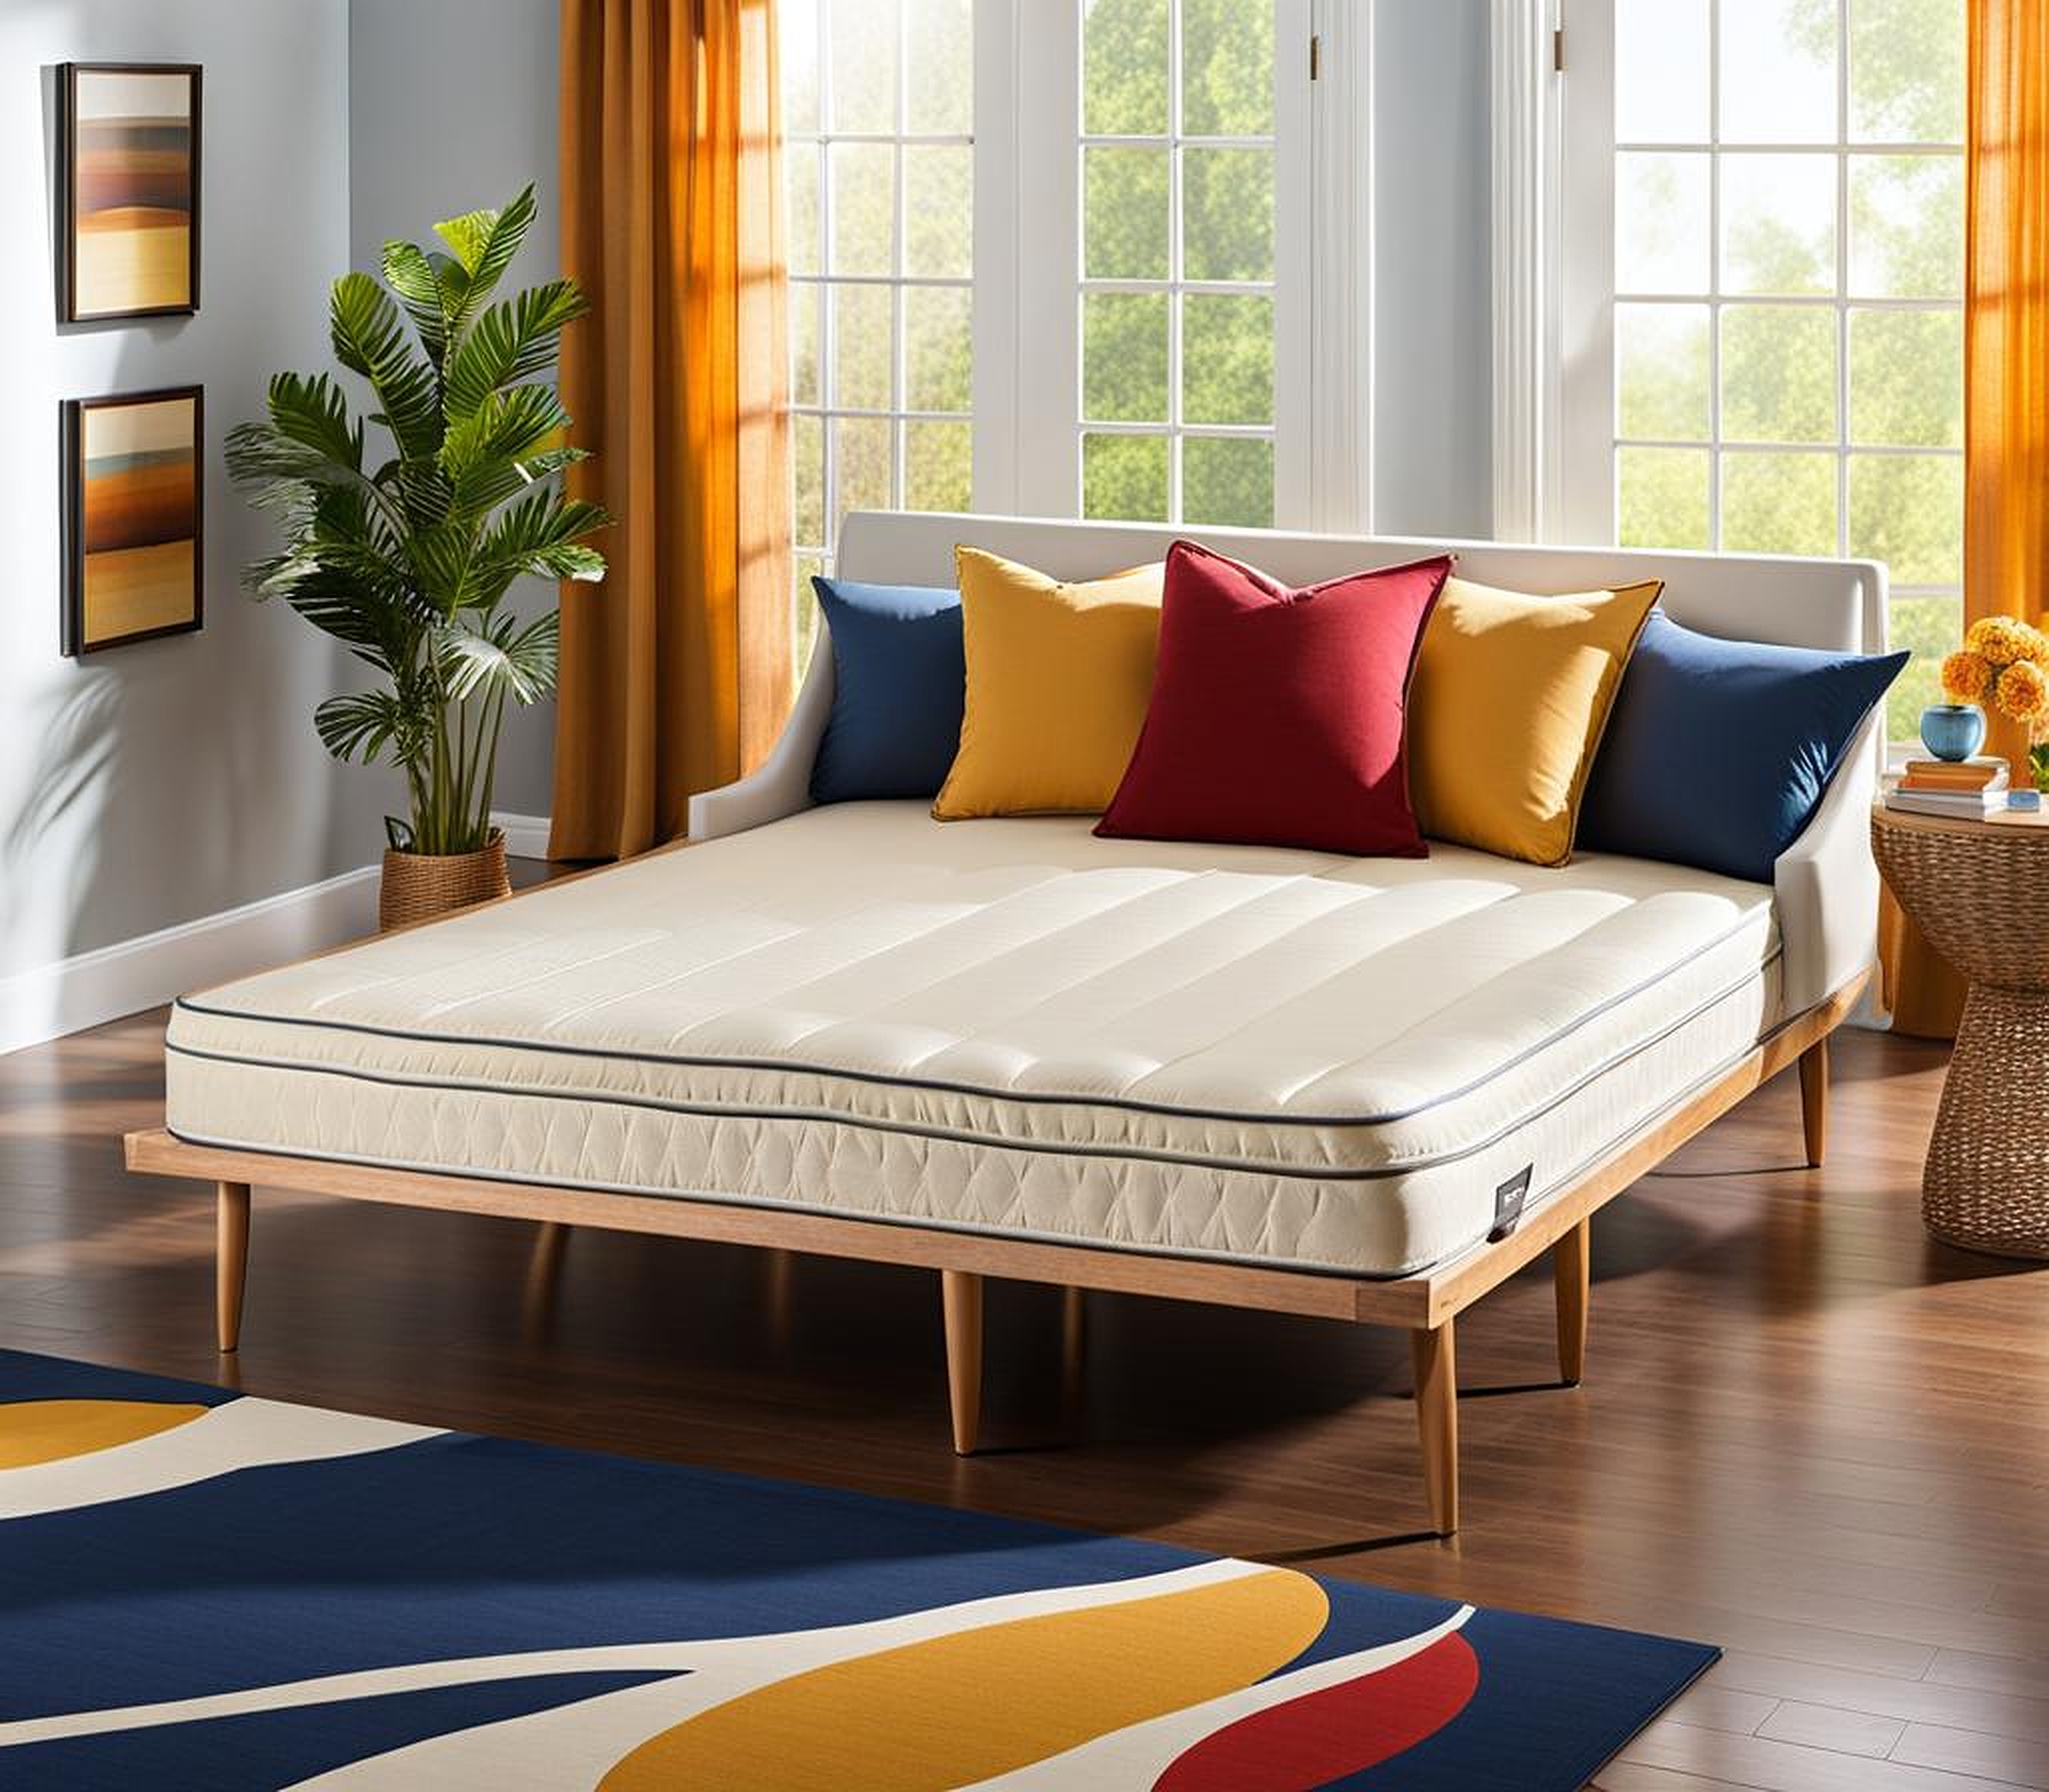 Ergonomic Considerations for the Perfect Daybed Mattress Size